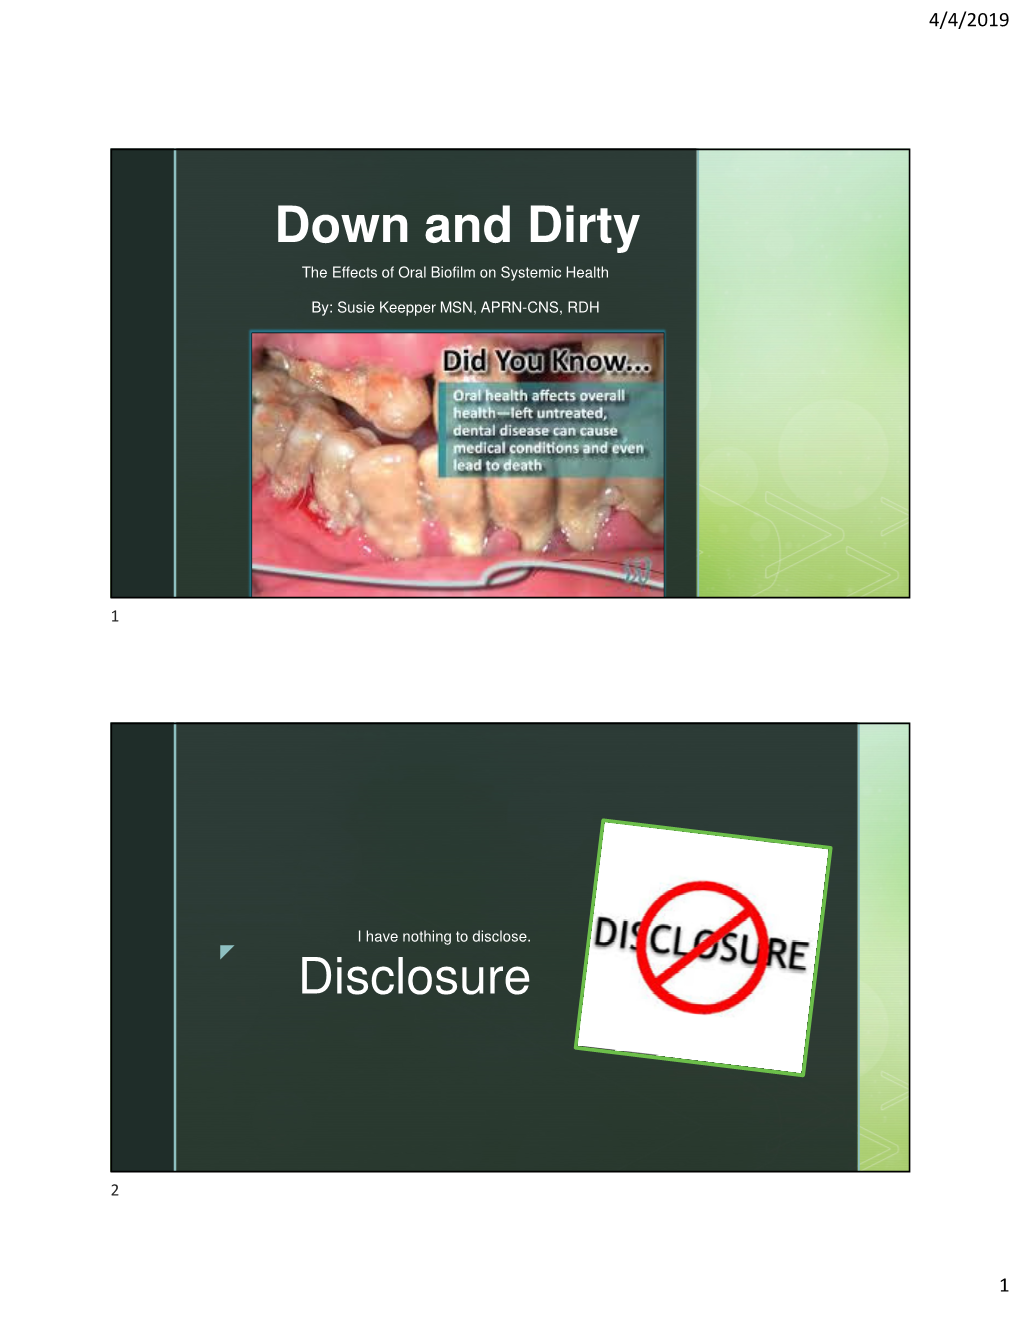 Down and Dirty Disclosure